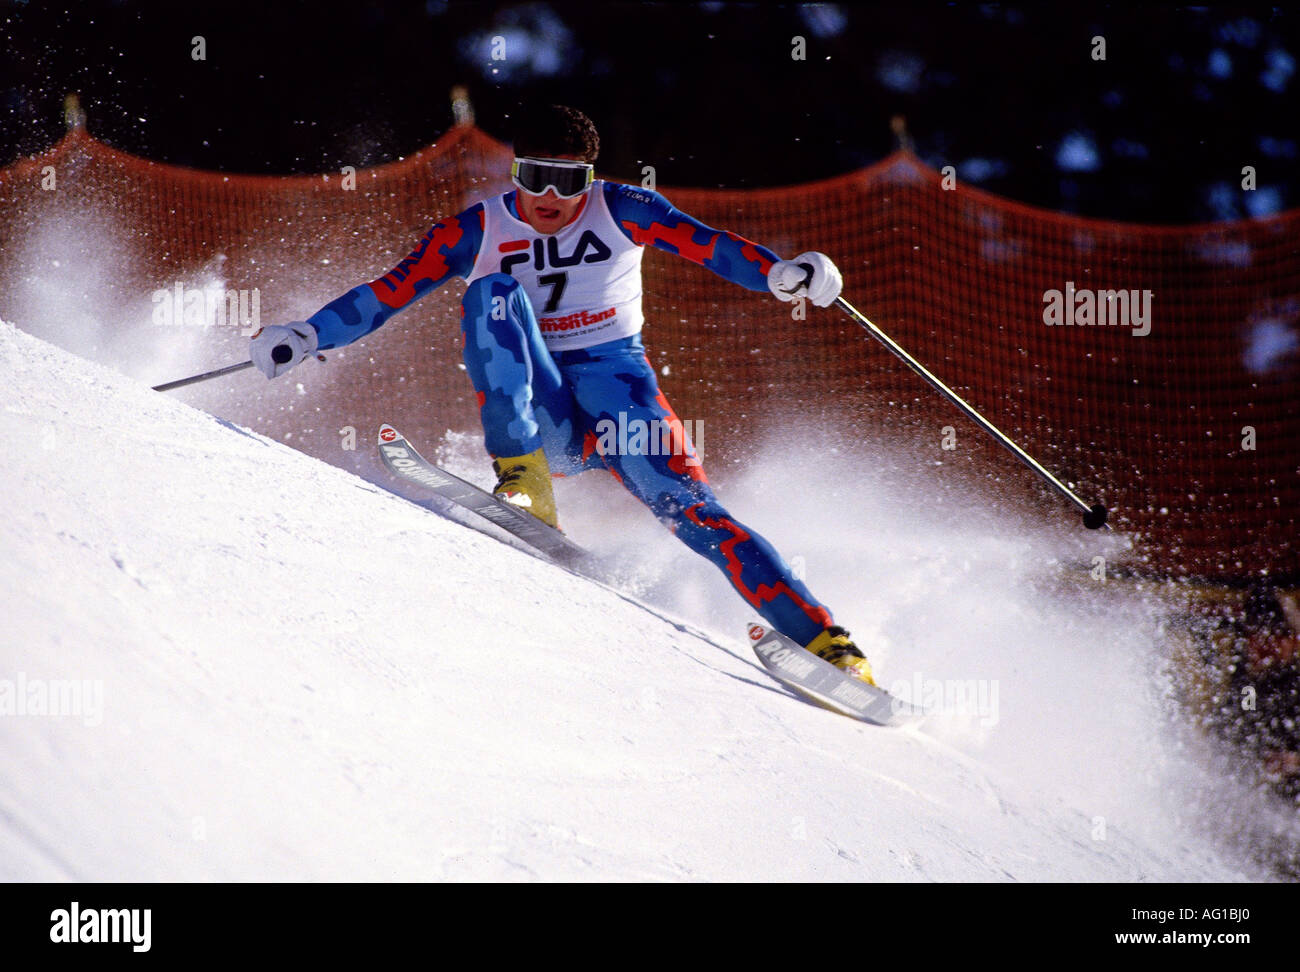 Alberto Tomba High Resolution Stock Photography and Images - Alamy